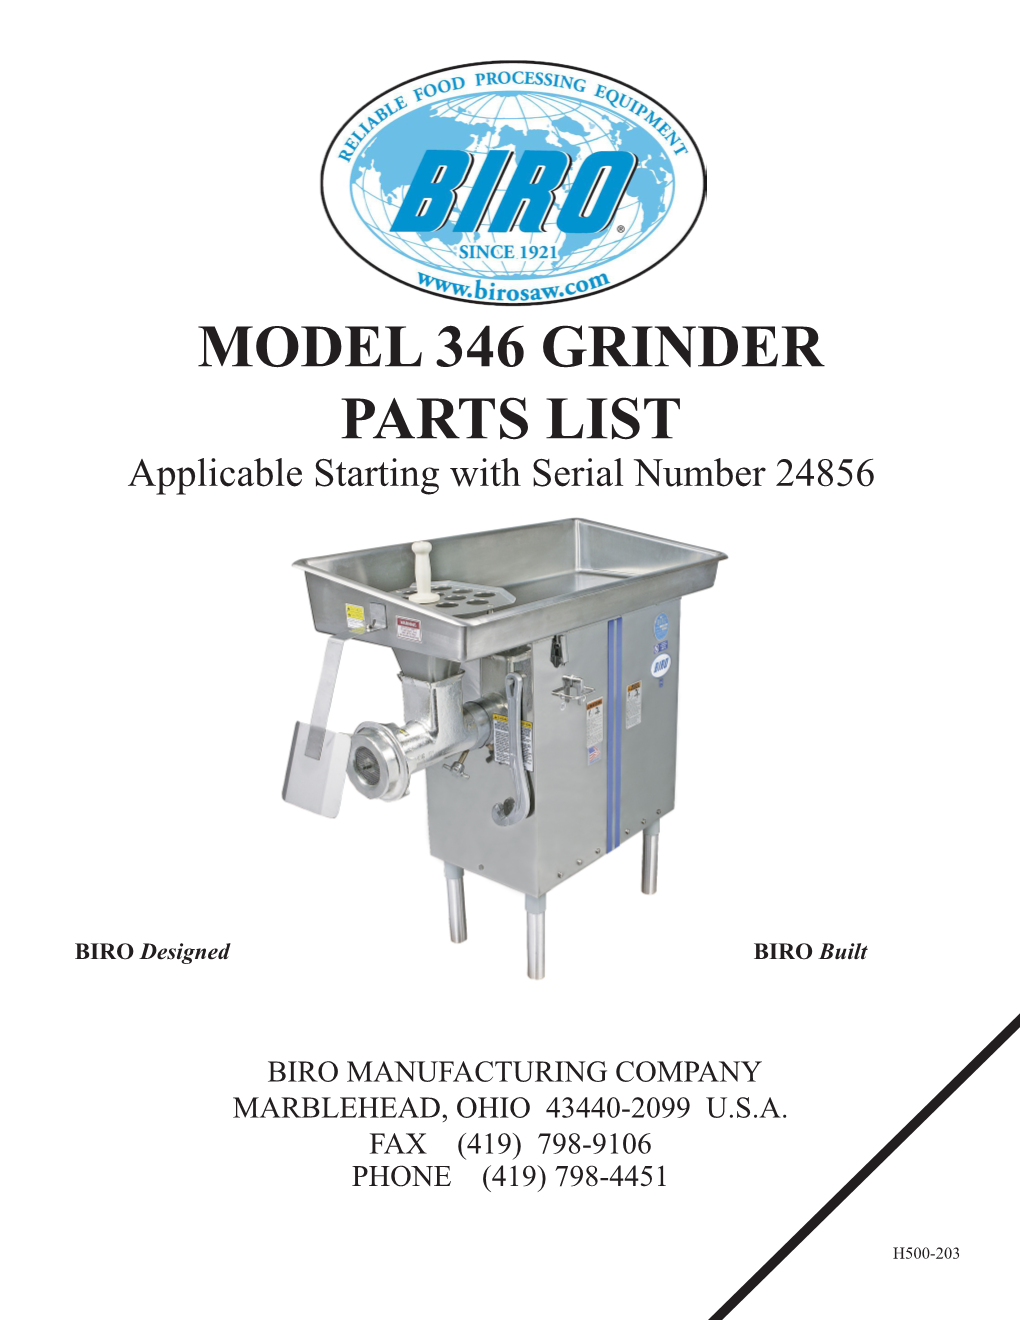 MODEL 346 GRINDER PARTS LIST Applicable Starting with Serial Number 24856